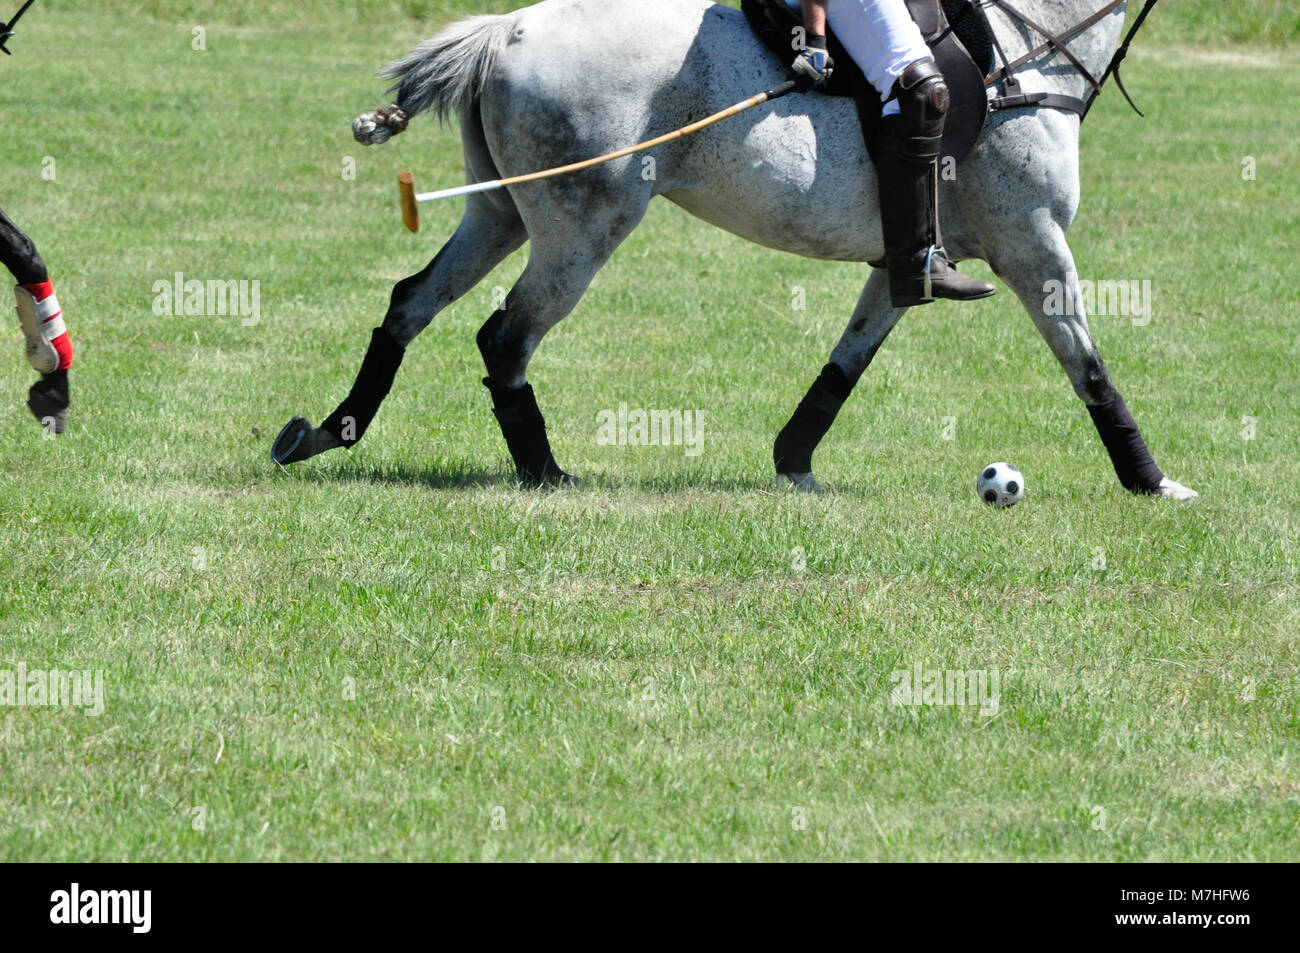 A polo player strikes a ball during a cowboys versus polo players game at the Historic Bar U Ranch in Longview, Alberta, Canada Stock Photo